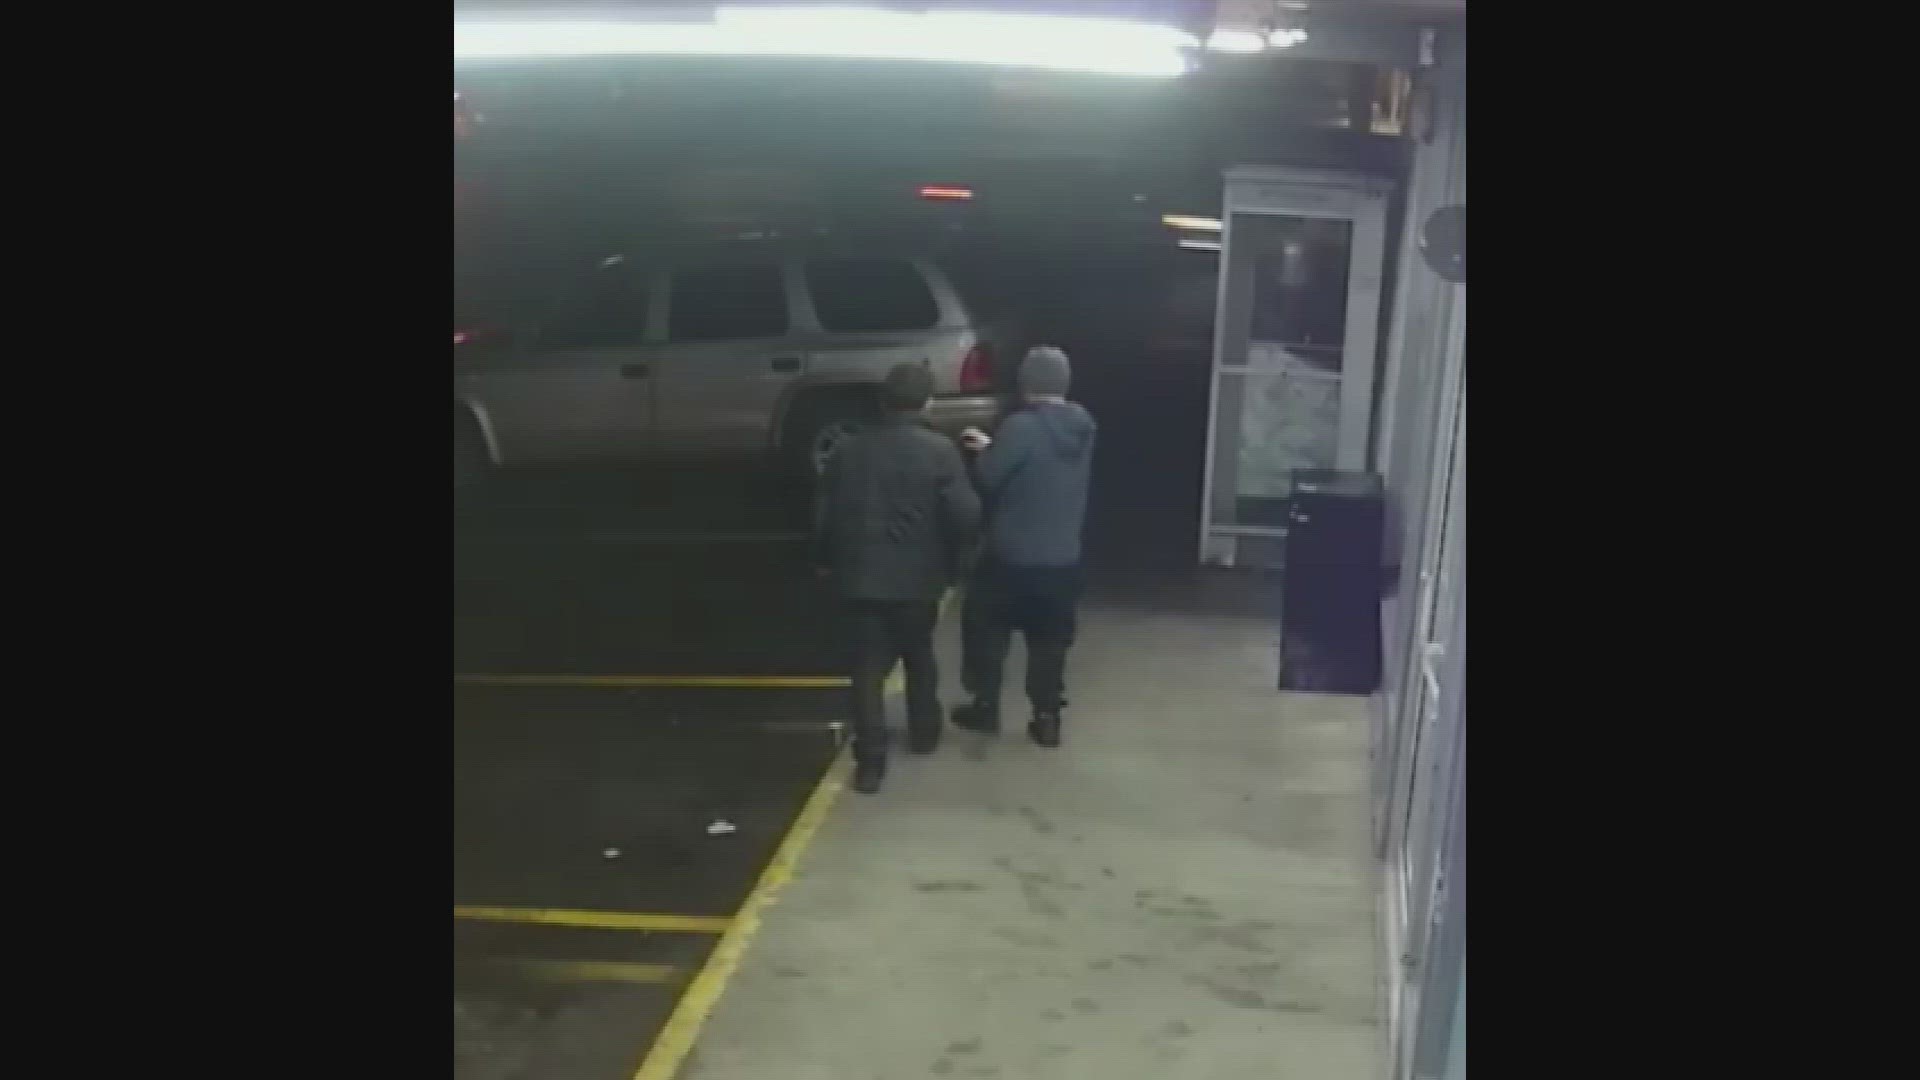 Surveillance video shows the attack in front of the Glisan Market in Northeast Portland. The video shows the suspect throwing a large chunk of concrete.